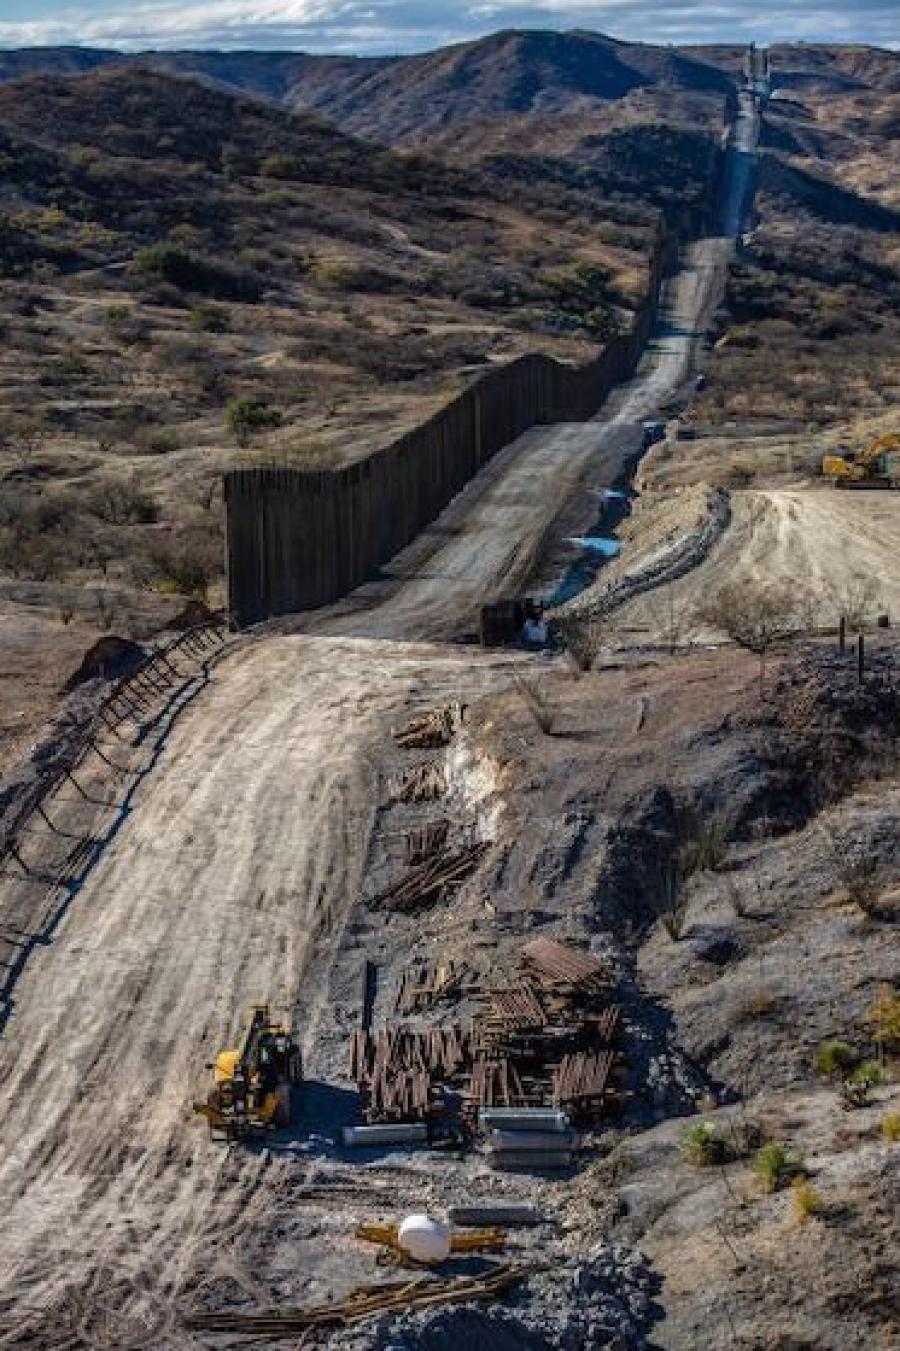 The donated materials are part of a federal effort to clear out the estimated $265 million in leftover wall parts from dormant construction sites along the U.S.-Mexico border.